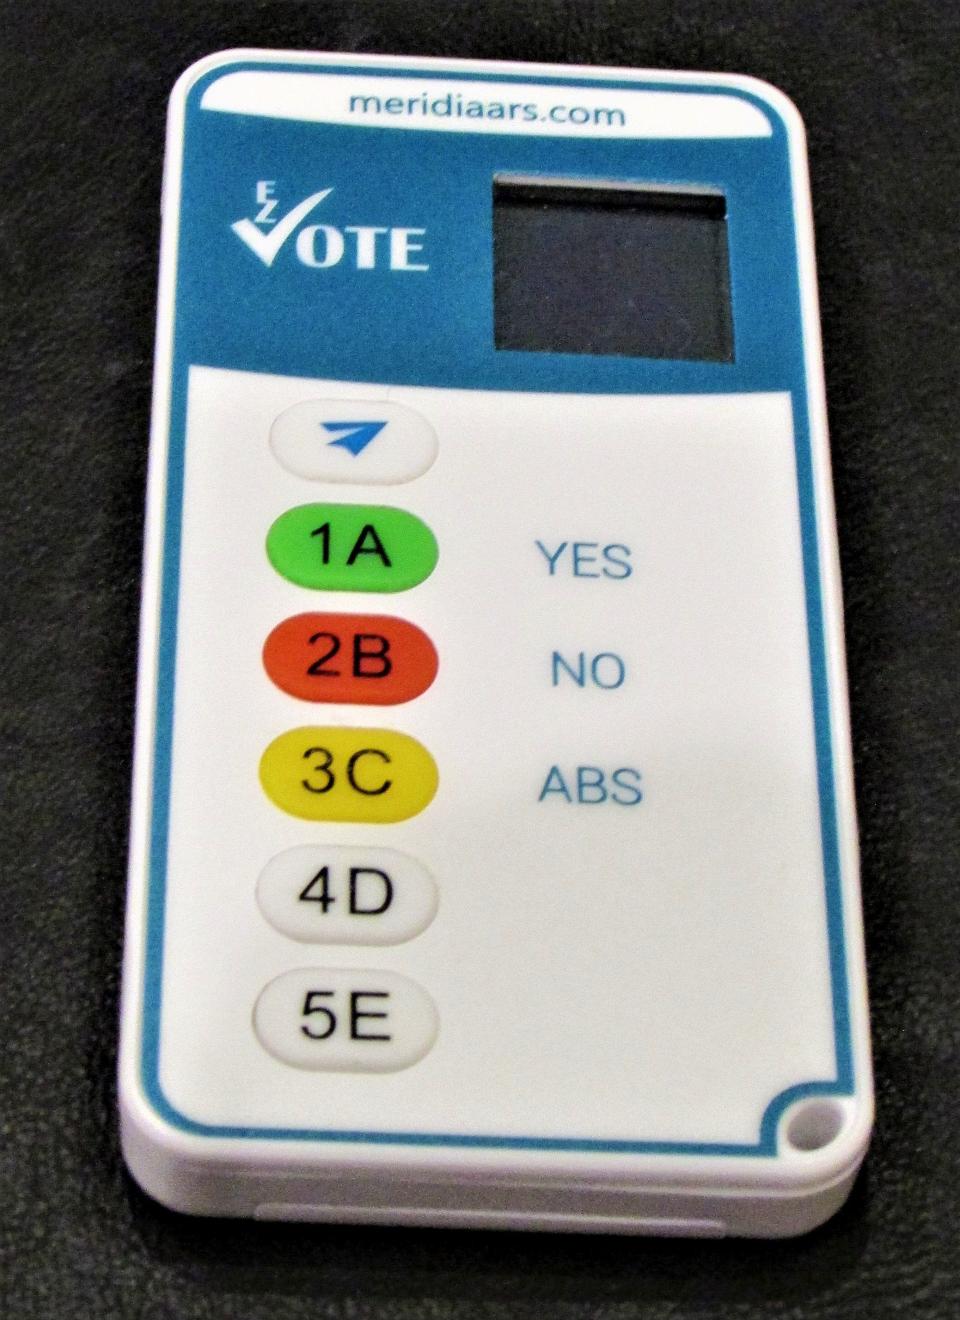 Voting at Bourne's special town meeting on Monday night was expedited by digital devices.